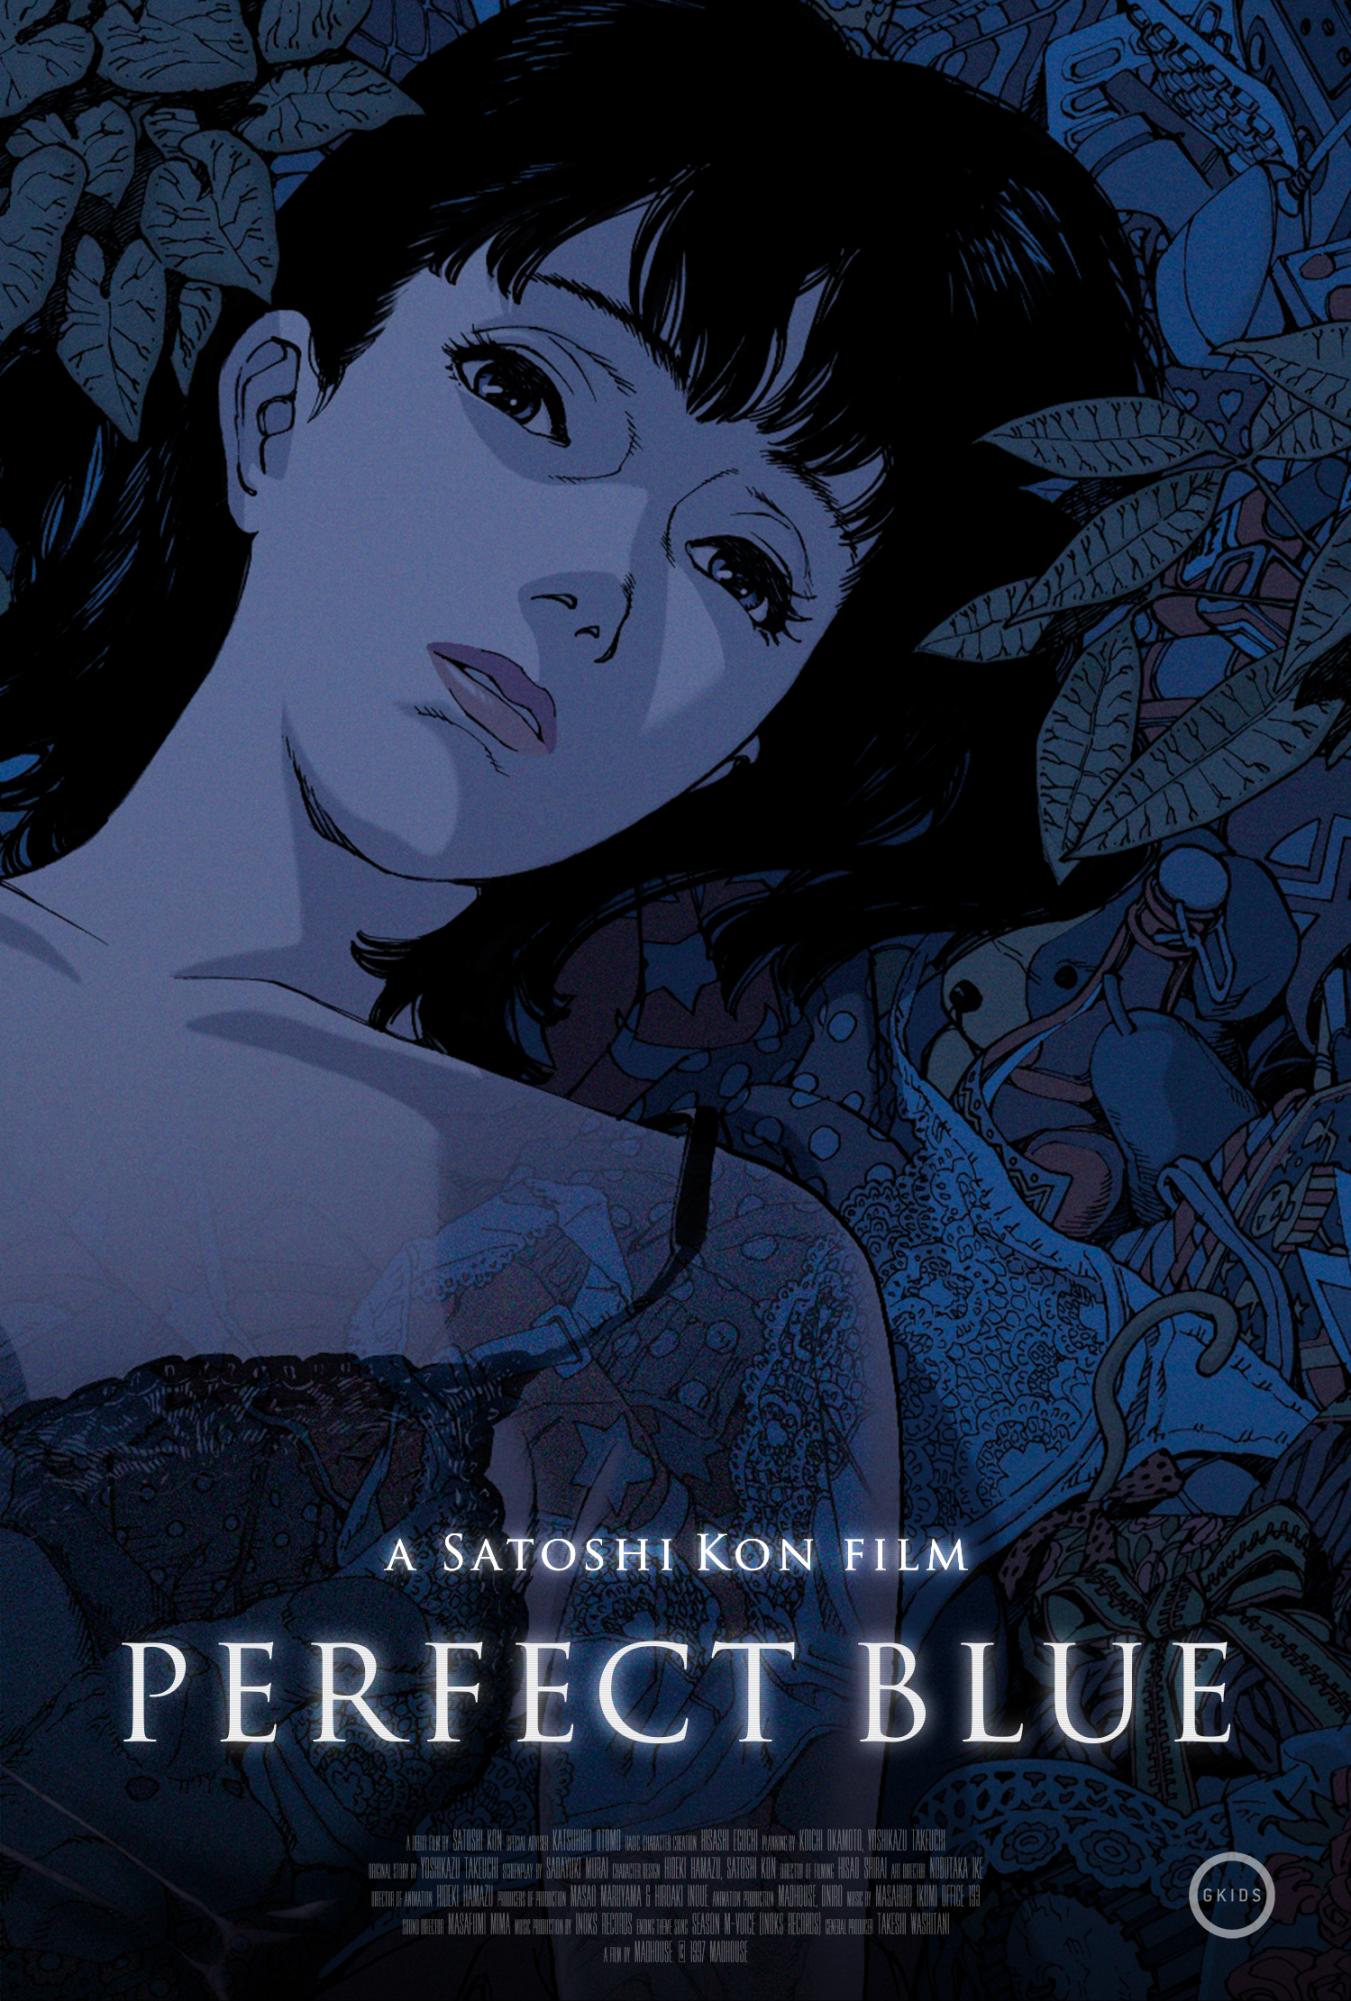 A Review of Perfect Blue